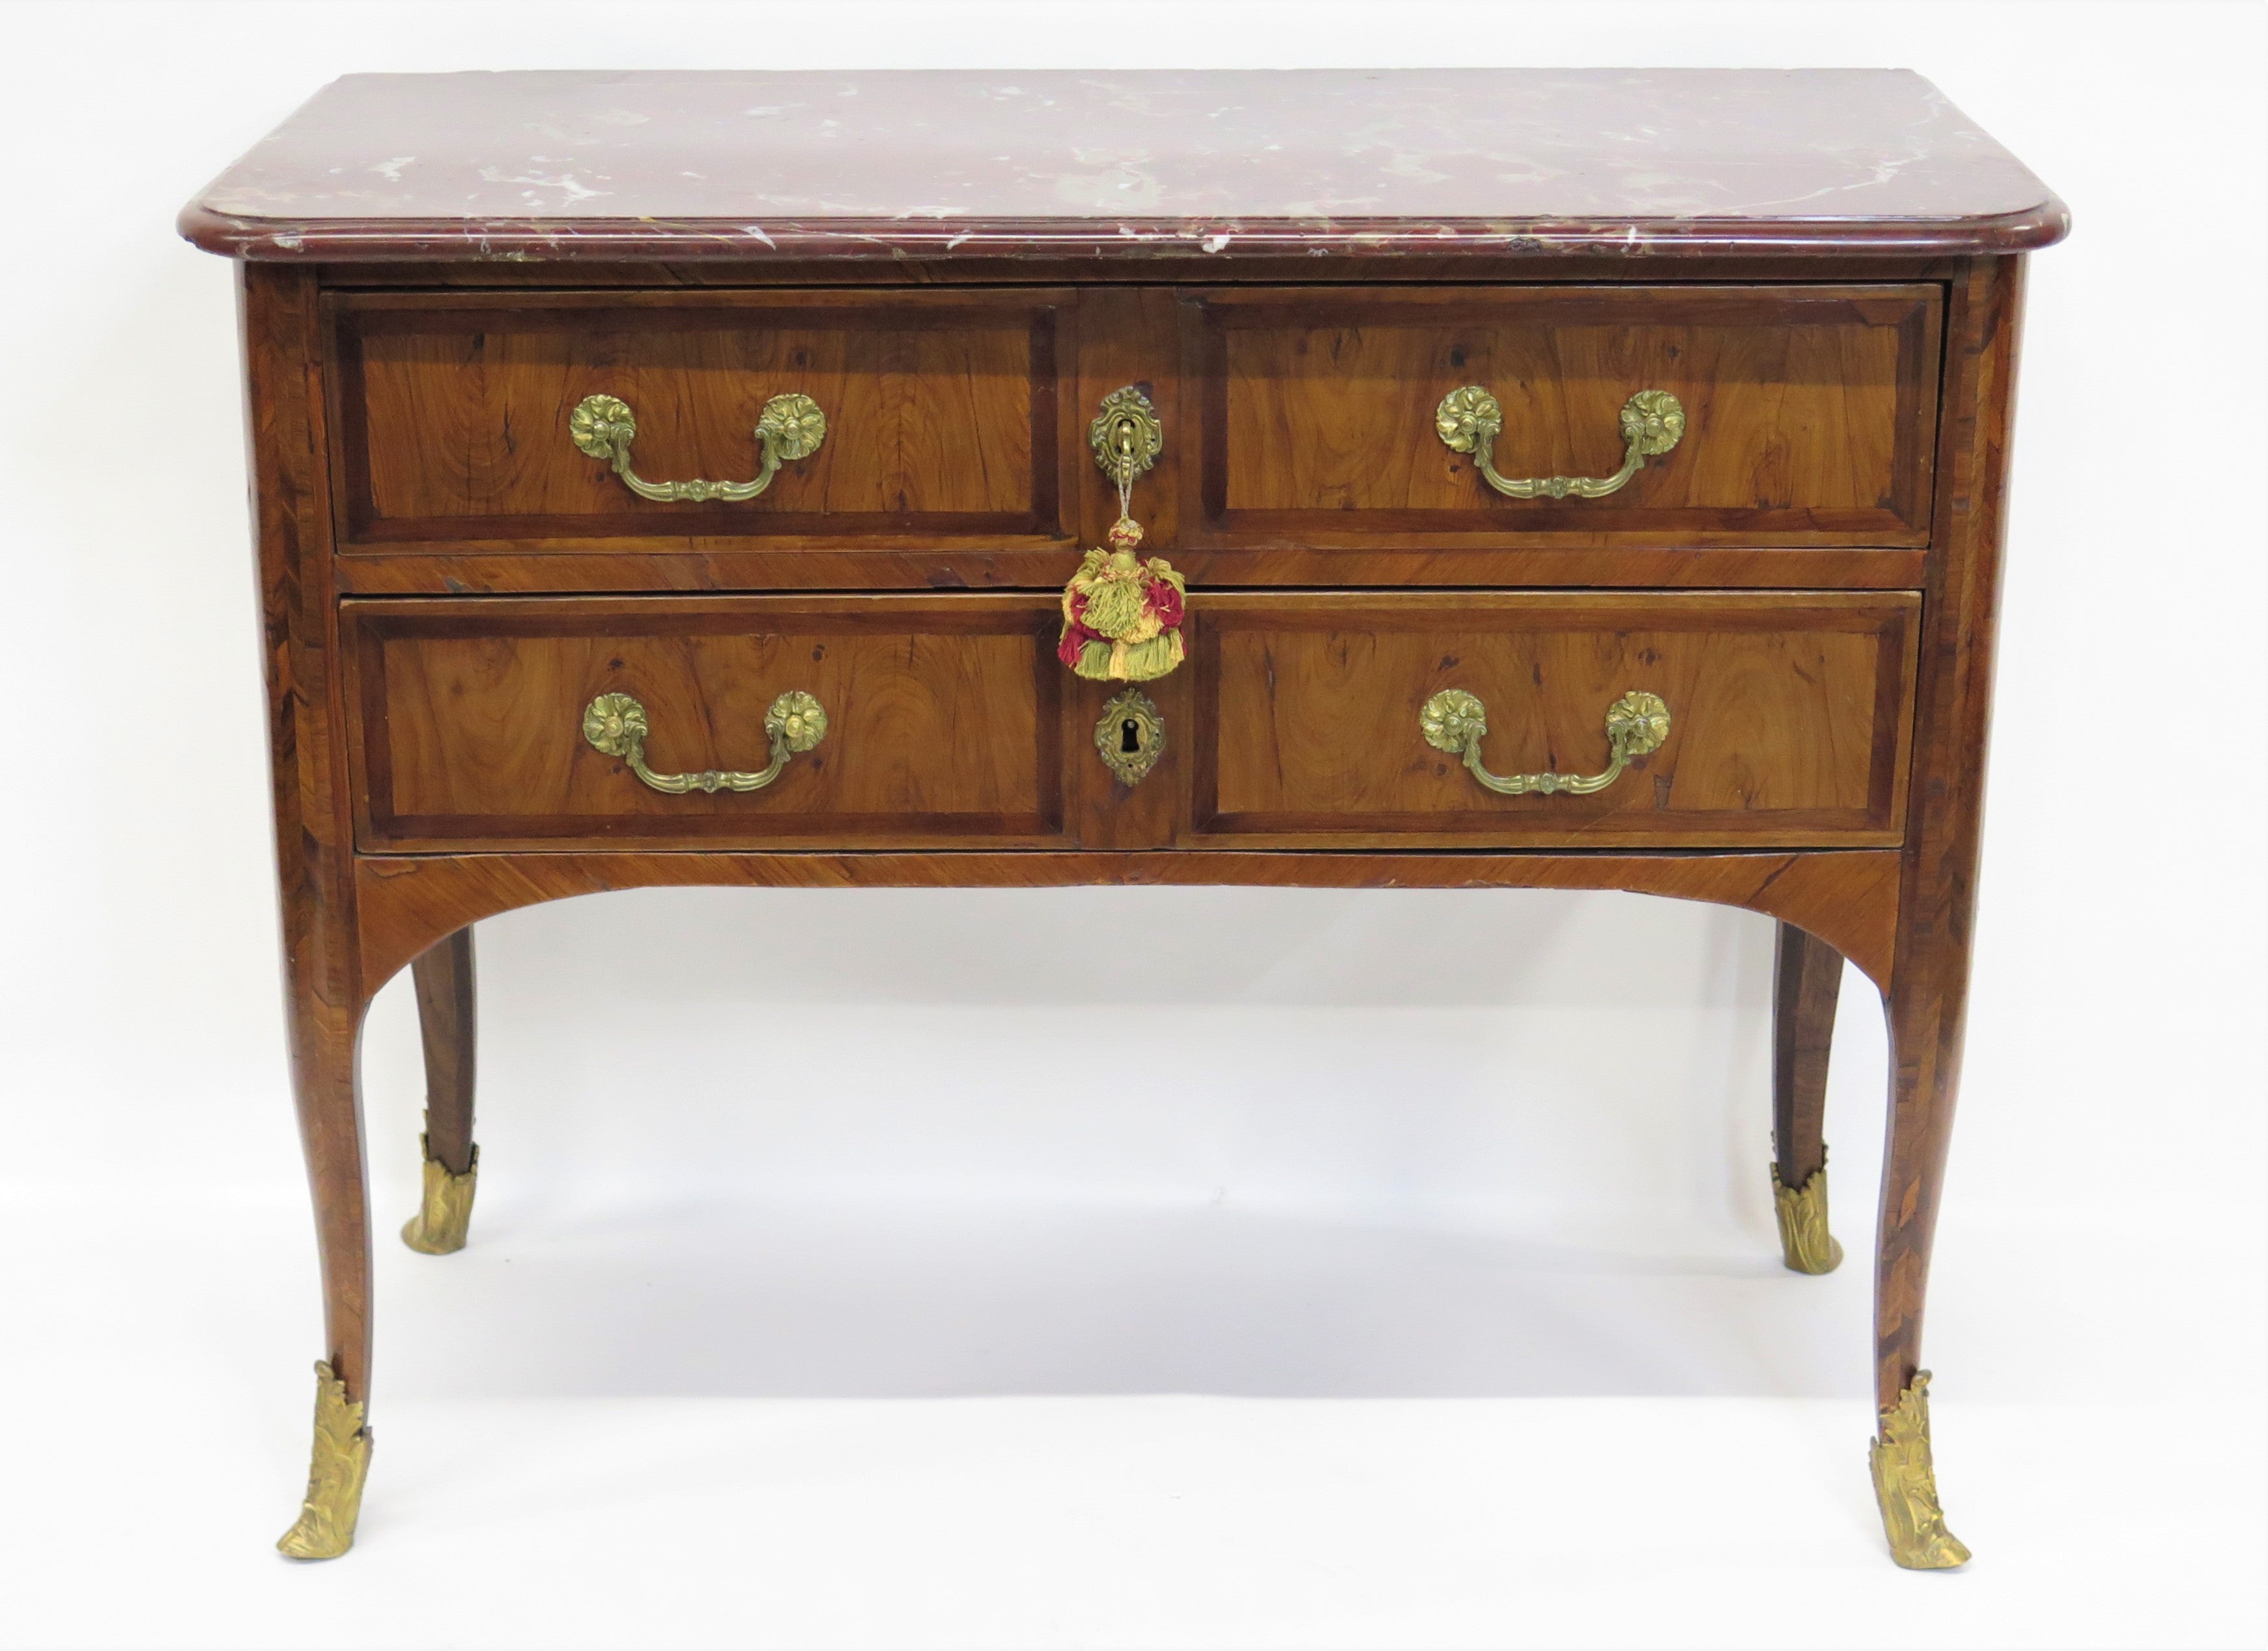 Louis XV 2-Drawer Commode with Marquetry Decoration Reddish Marble Top Having Grey and Tan Veining